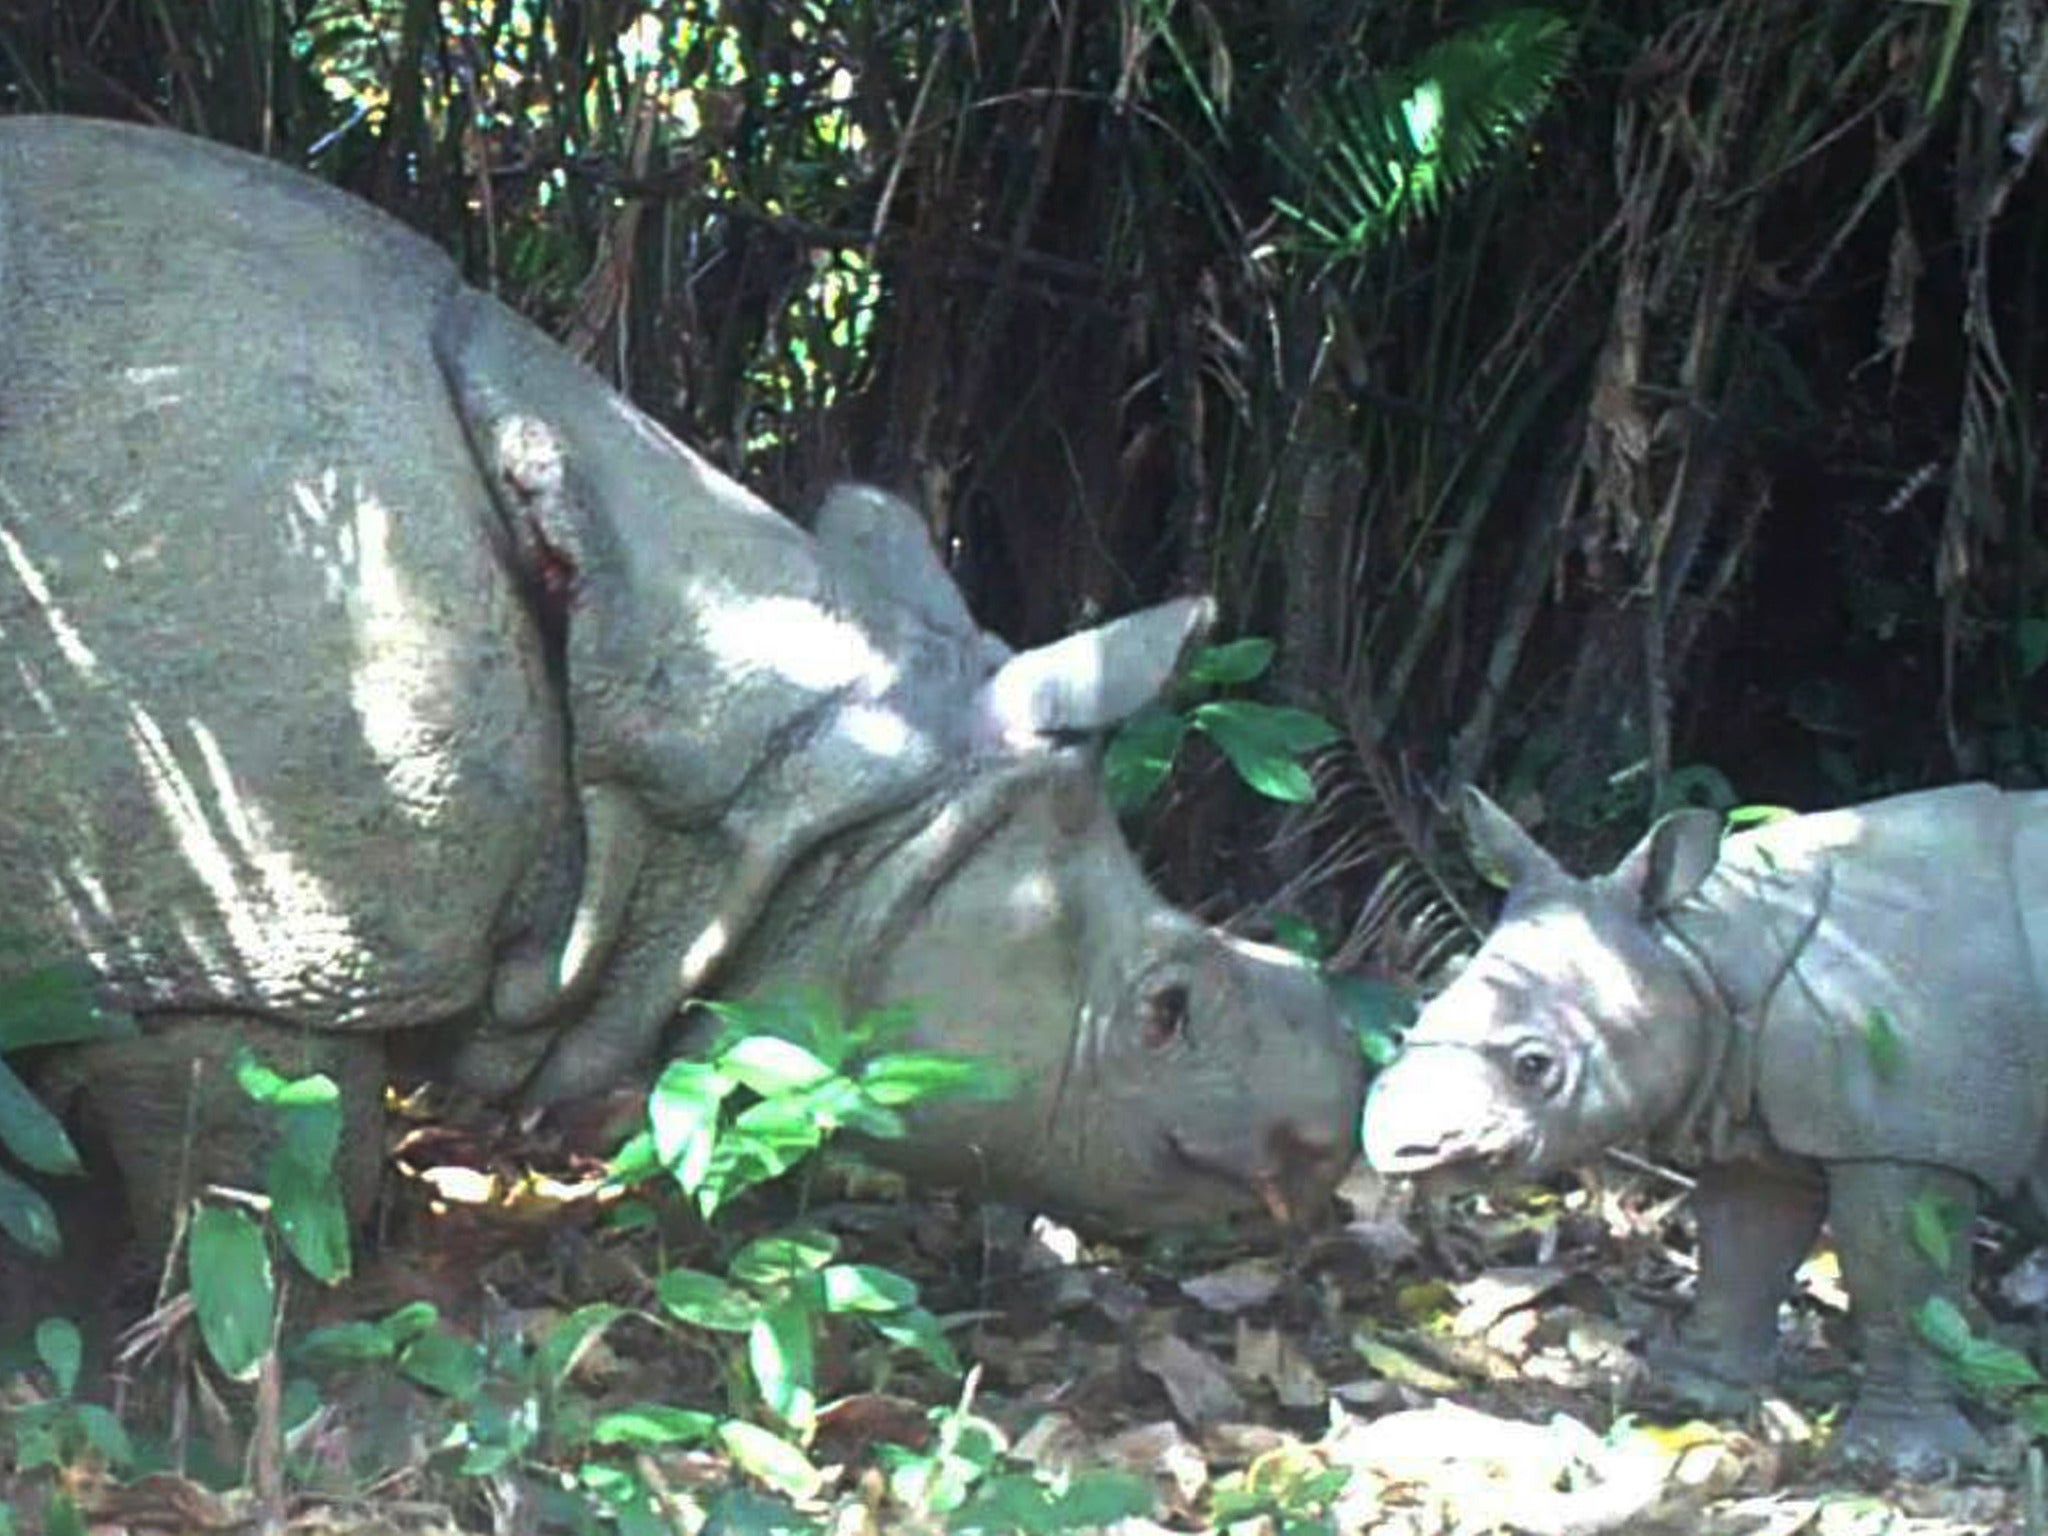 Officials said two male calves and one female had been filmed at Ujung Kulon national park